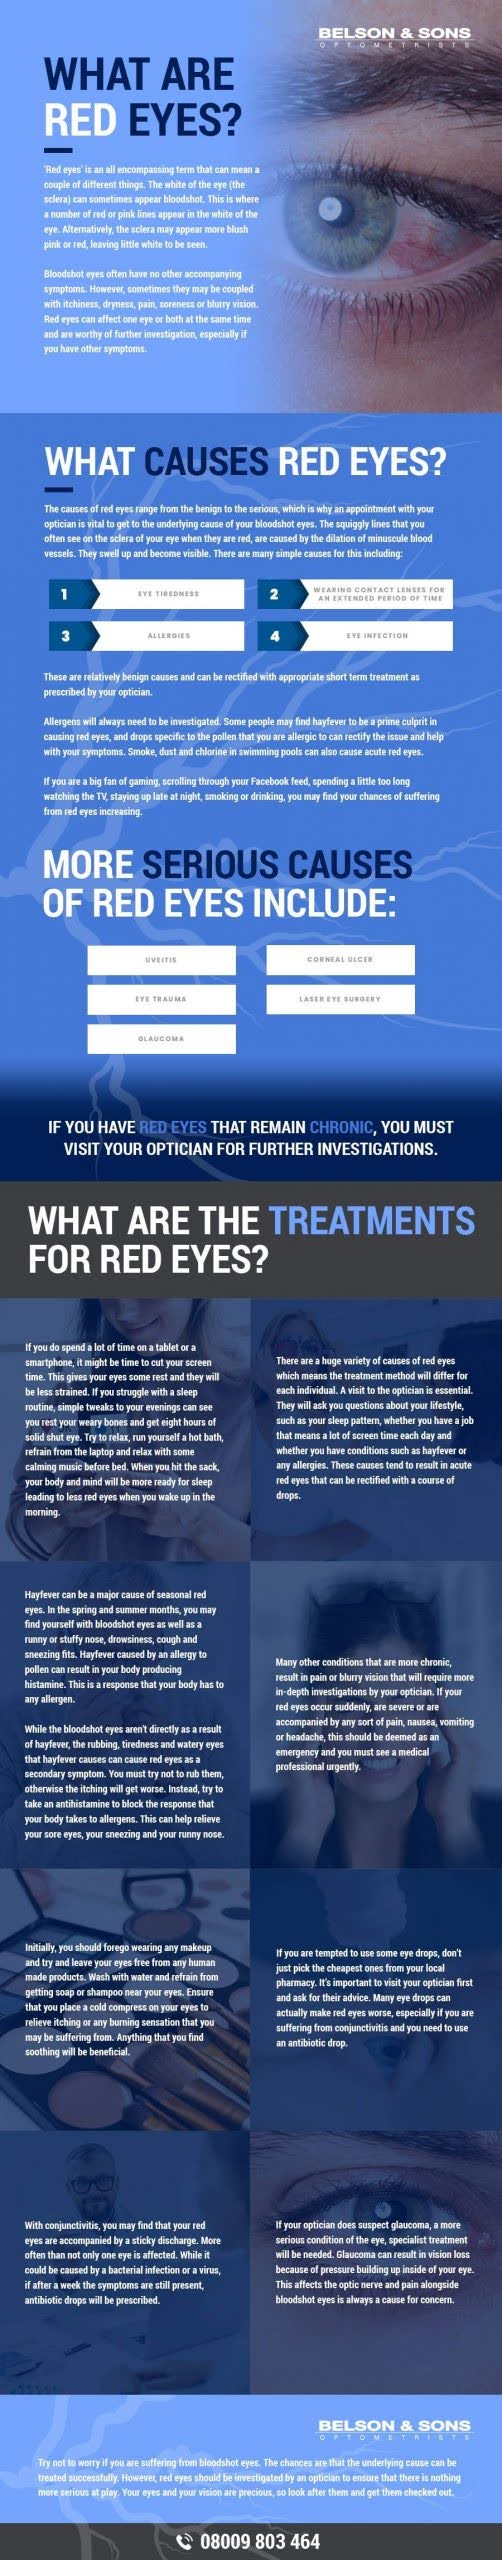 What Are Red Eyes? #infographic